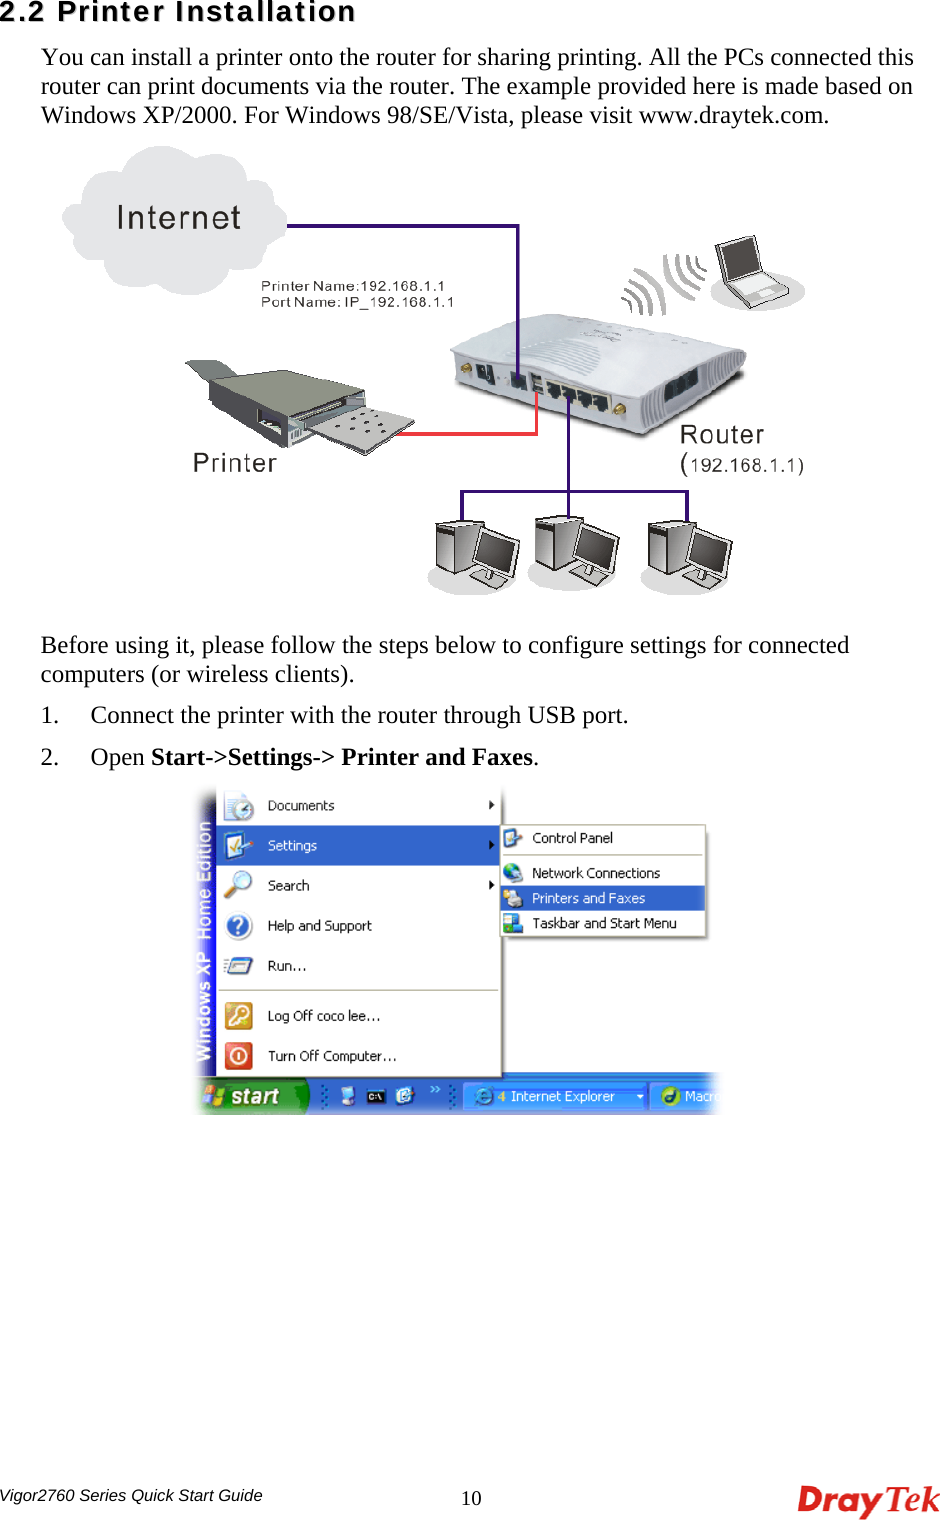  Vigor2760 Series Quick Start Guide 1022..22  PPrriinntteerr  IInnssttaallllaattiioonn  You can install a printer onto the router for sharing printing. All the PCs connected this router can print documents via the router. The example provided here is made based on Windows XP/2000. For Windows 98/SE/Vista, please visit www.draytek.com.  Before using it, please follow the steps below to configure settings for connected computers (or wireless clients). 1. Connect the printer with the router through USB port. 2. Open Start-&gt;Settings-&gt; Printer and Faxes.  